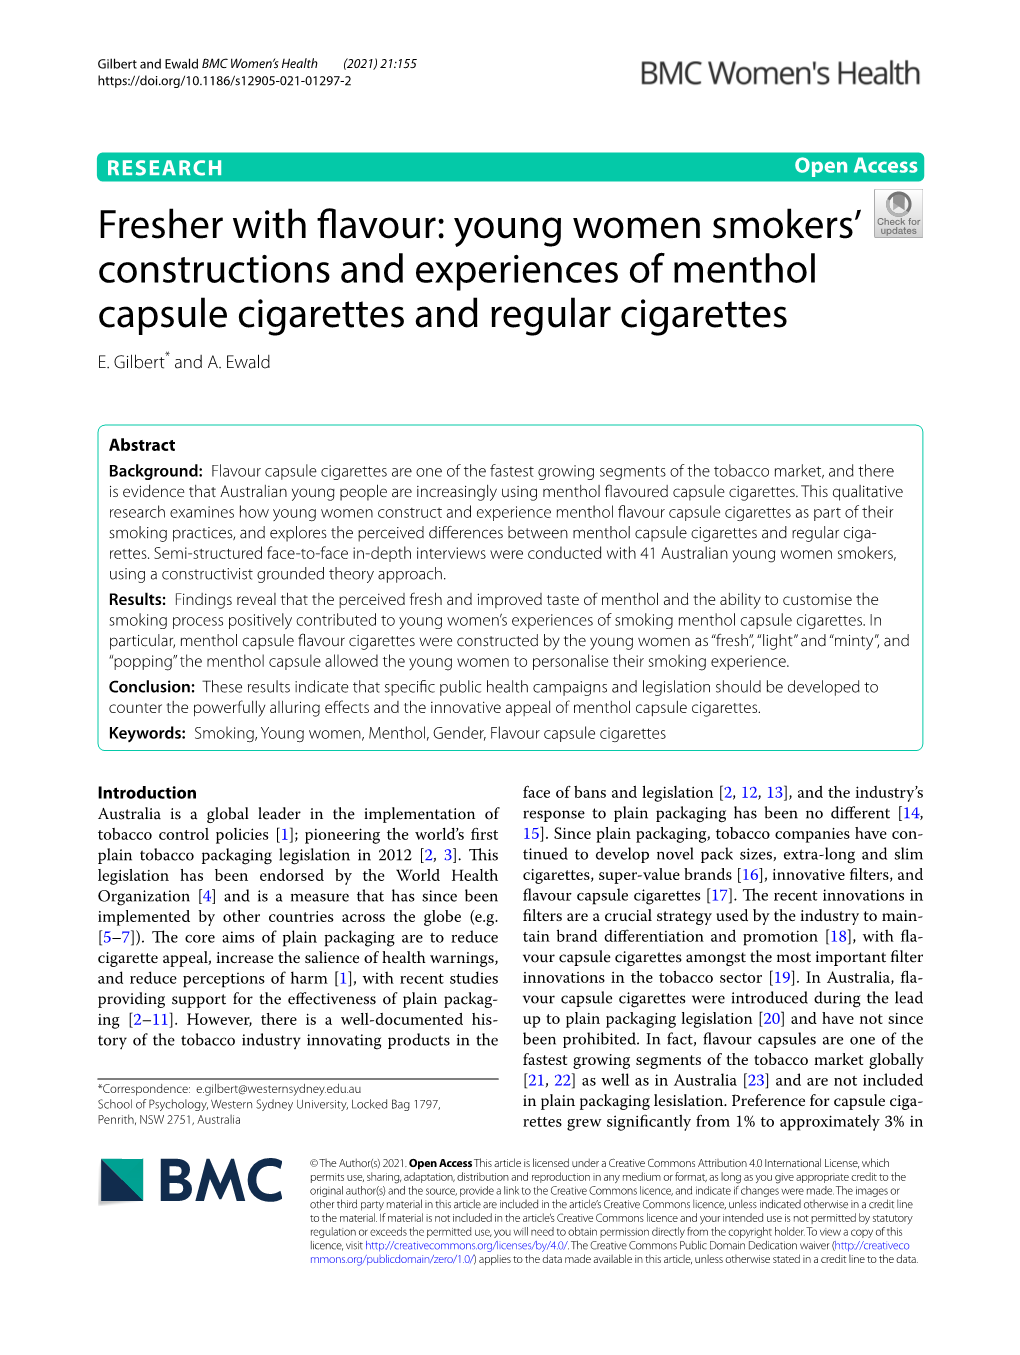 Young Women Smokers' Constructions and Experiences of Menthol